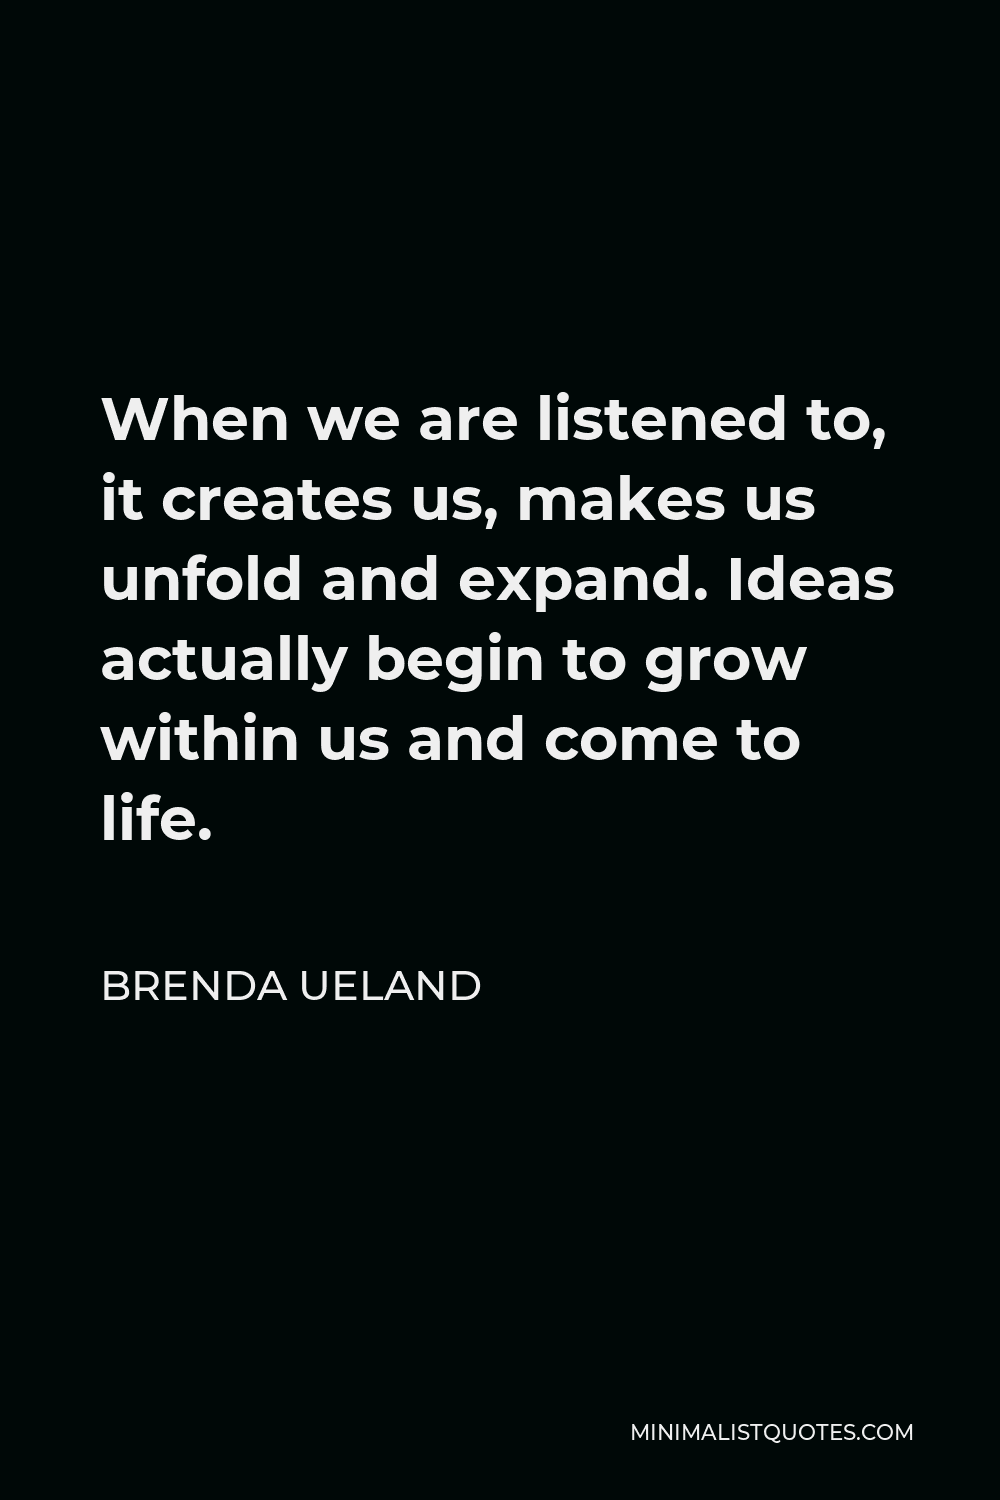 Brenda Ueland Quote - When we are listened to, it creates us, makes us unfold and expand. Ideas actually begin to grow within us and come to life.